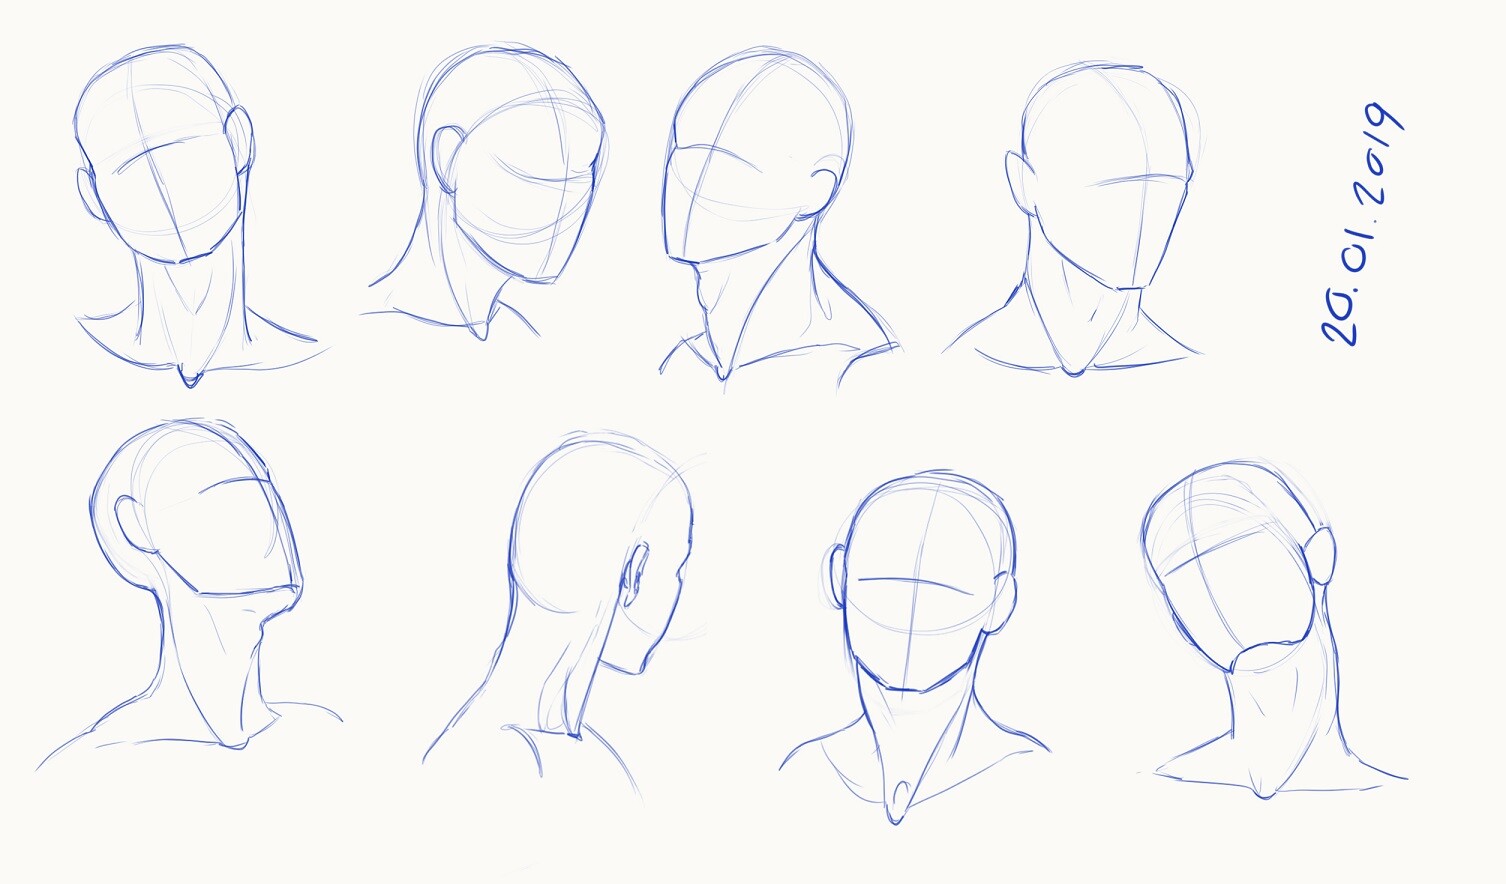 How to Draw Male Anime Face in 3/4 View Step by Step - AnimeOutline